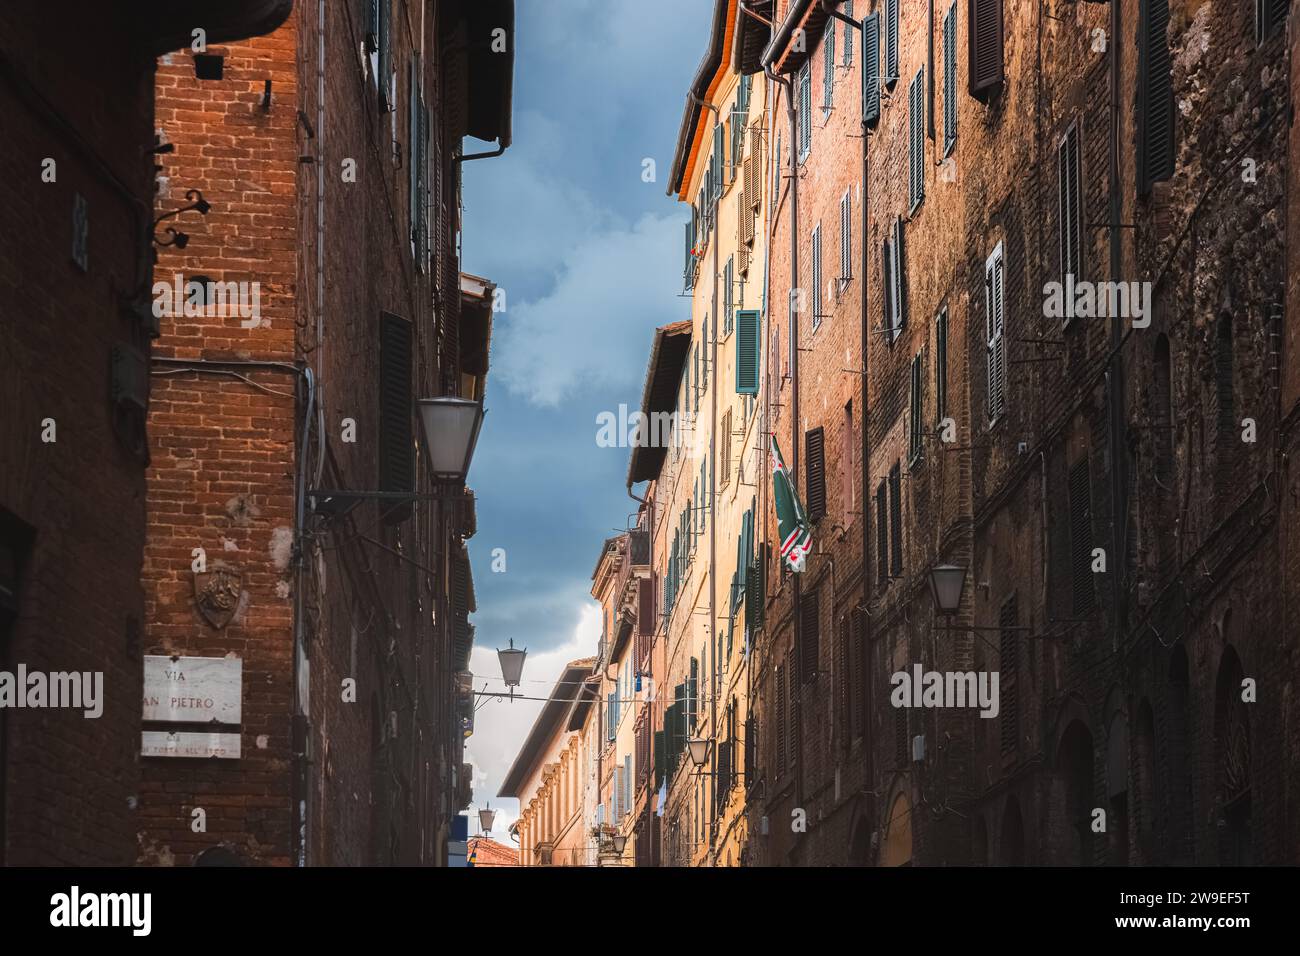 A dark moody sky over colourful residential buildings along a quaint and narrow backstreet in the historic Tuscan old town of Siena, Tuscany, Italy. Stock Photo